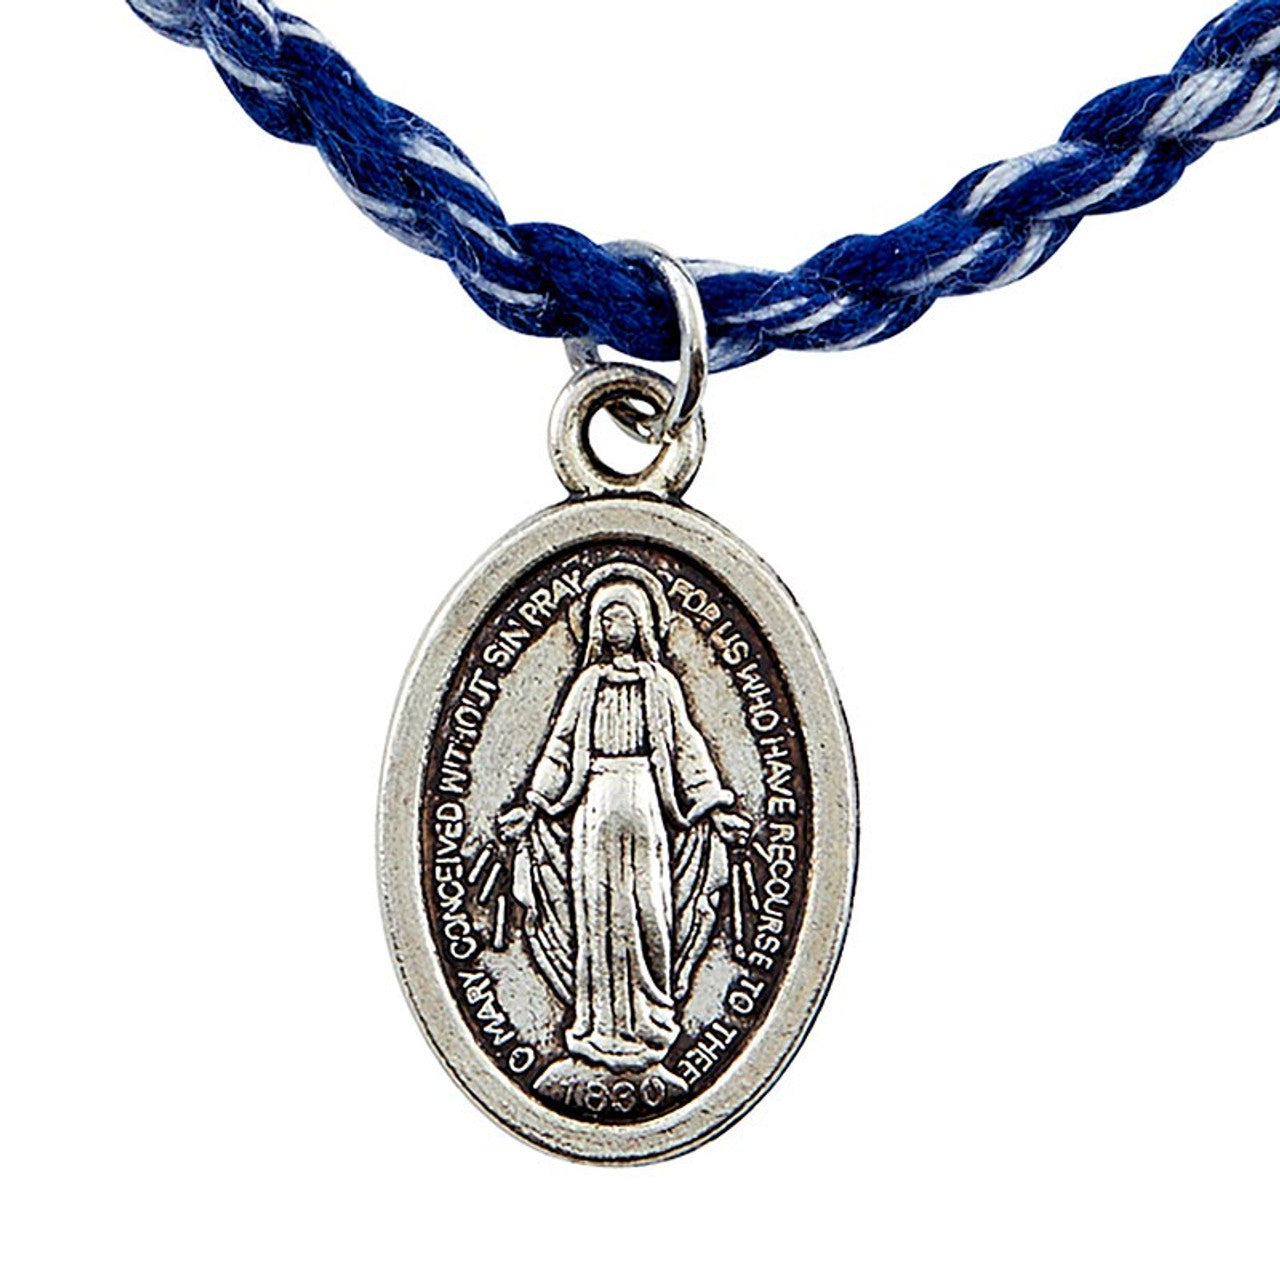 "Ave Maria" Woven Adjustable Bracelet with a Miraculous Medal